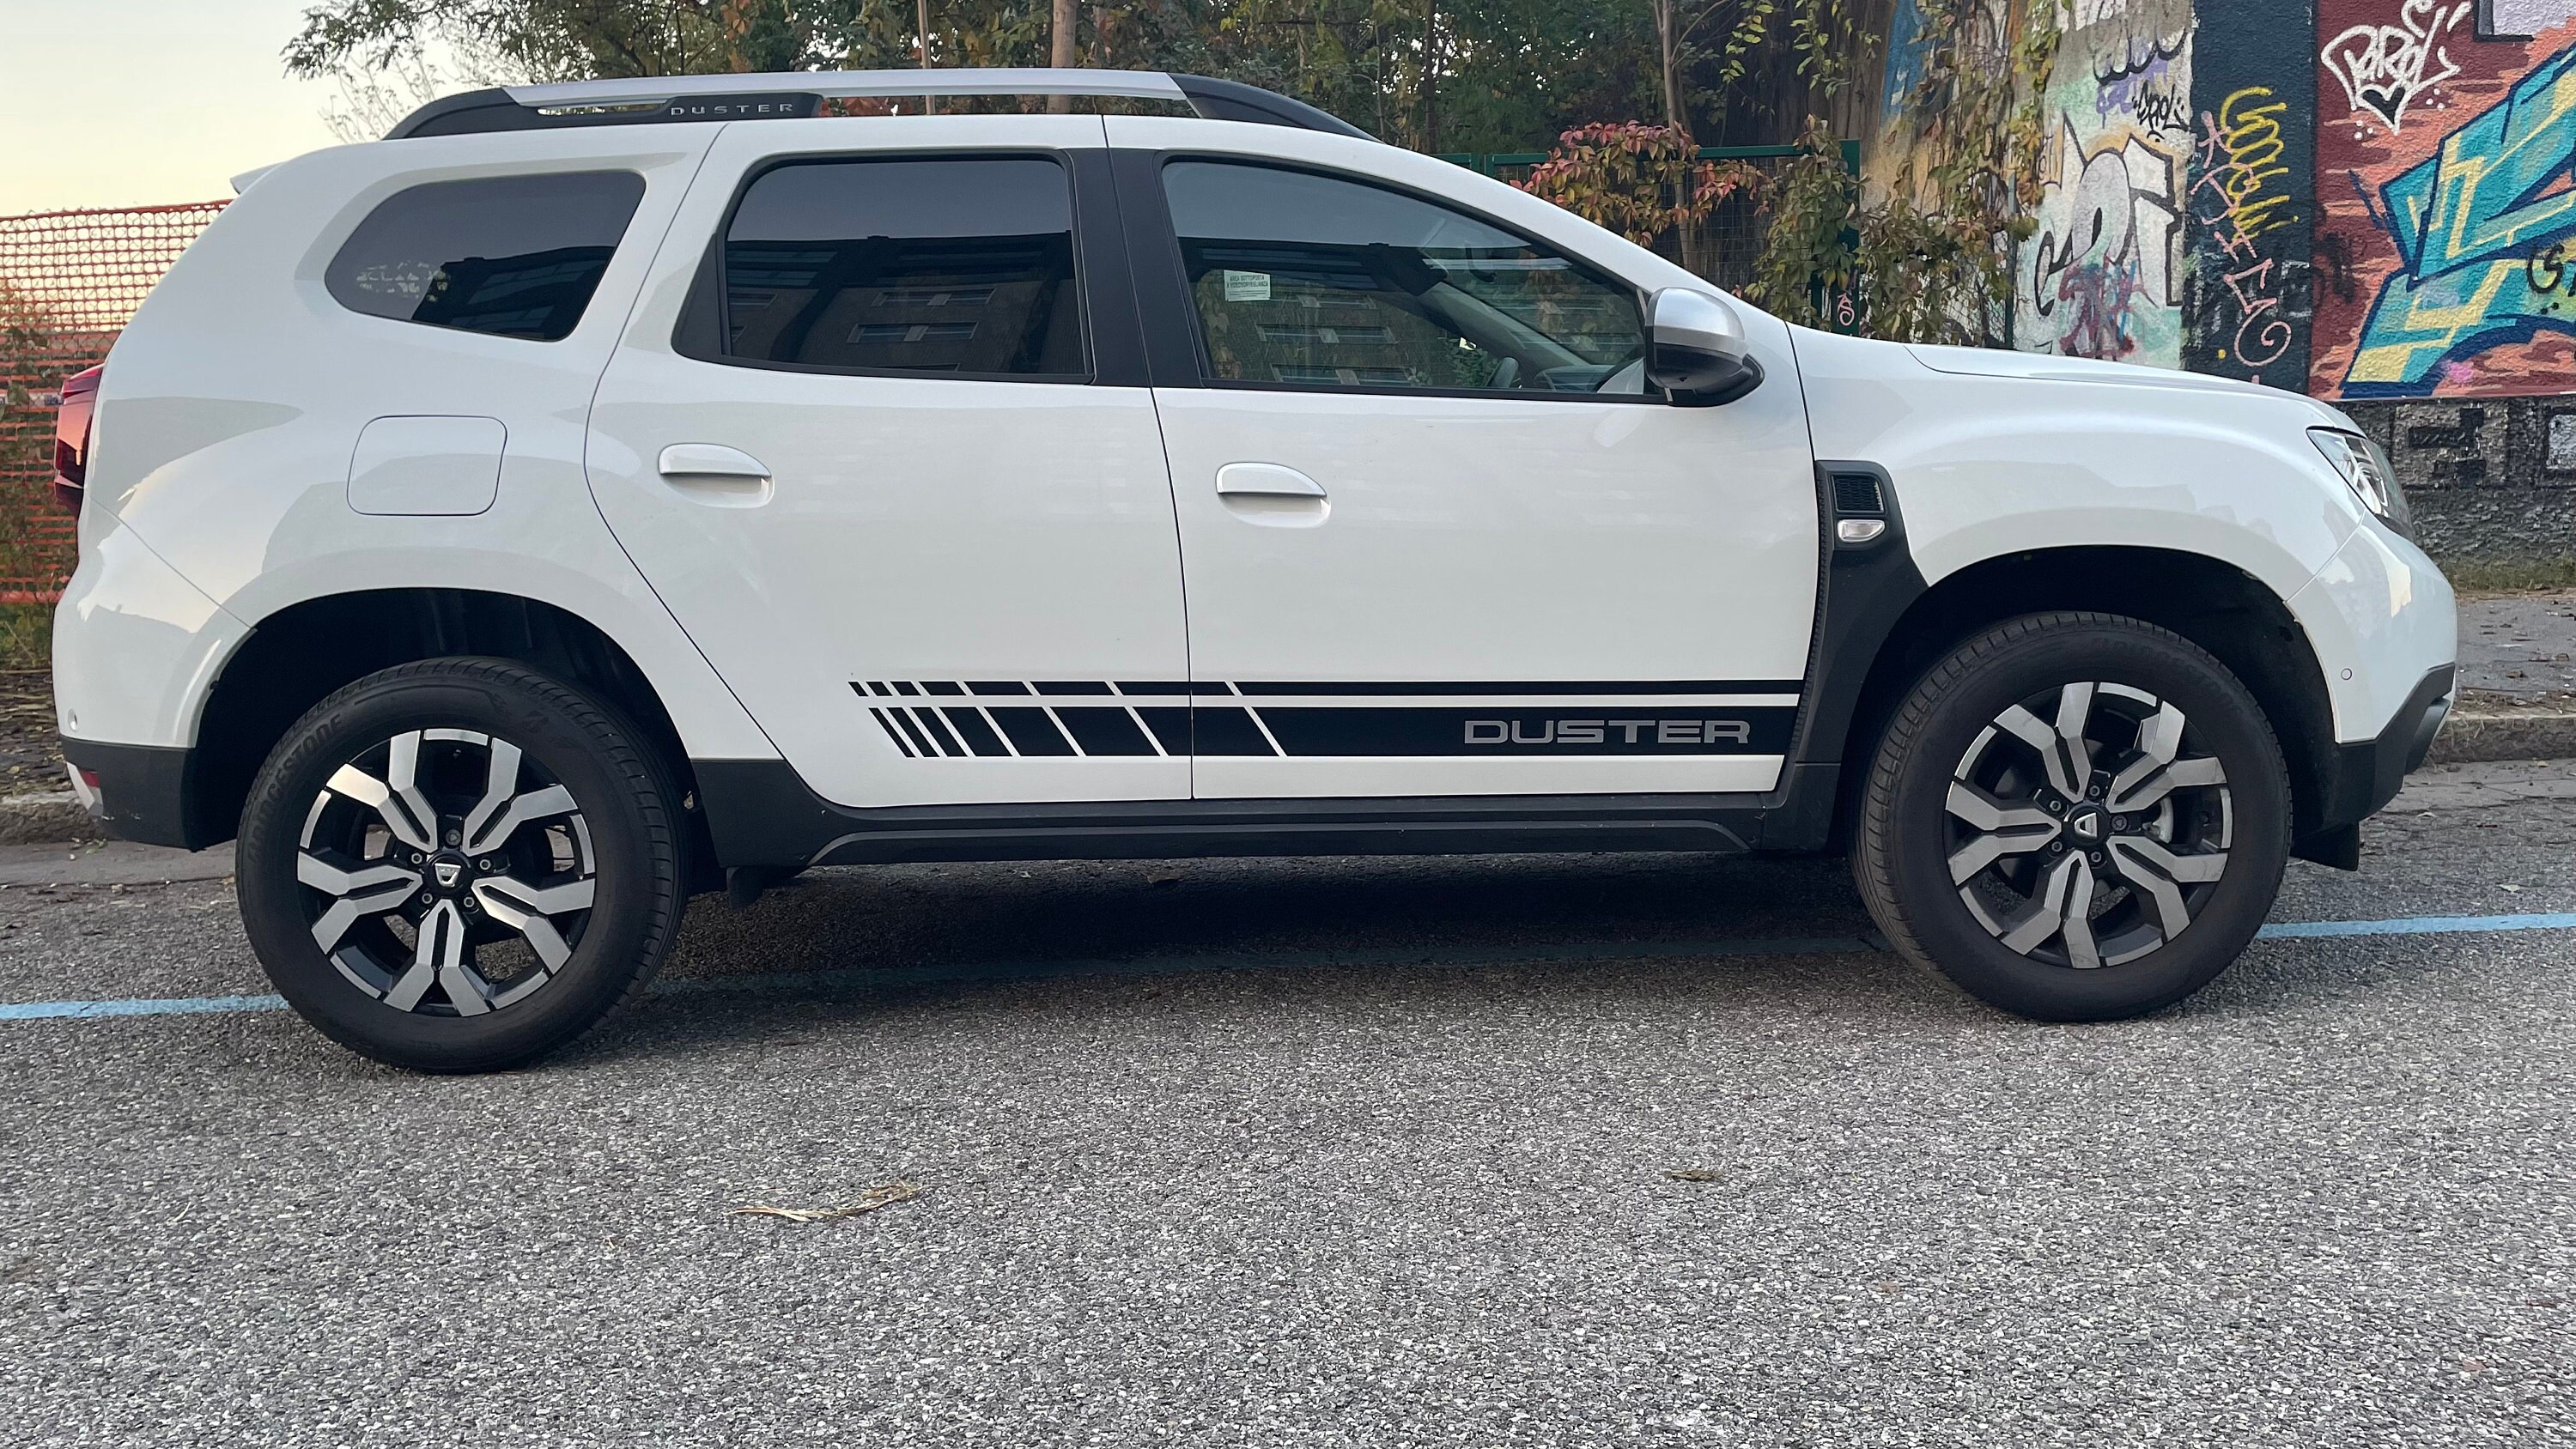 Side Stripes Stickers Dacia Duster 2022 Auto Tuning Sport Racing 